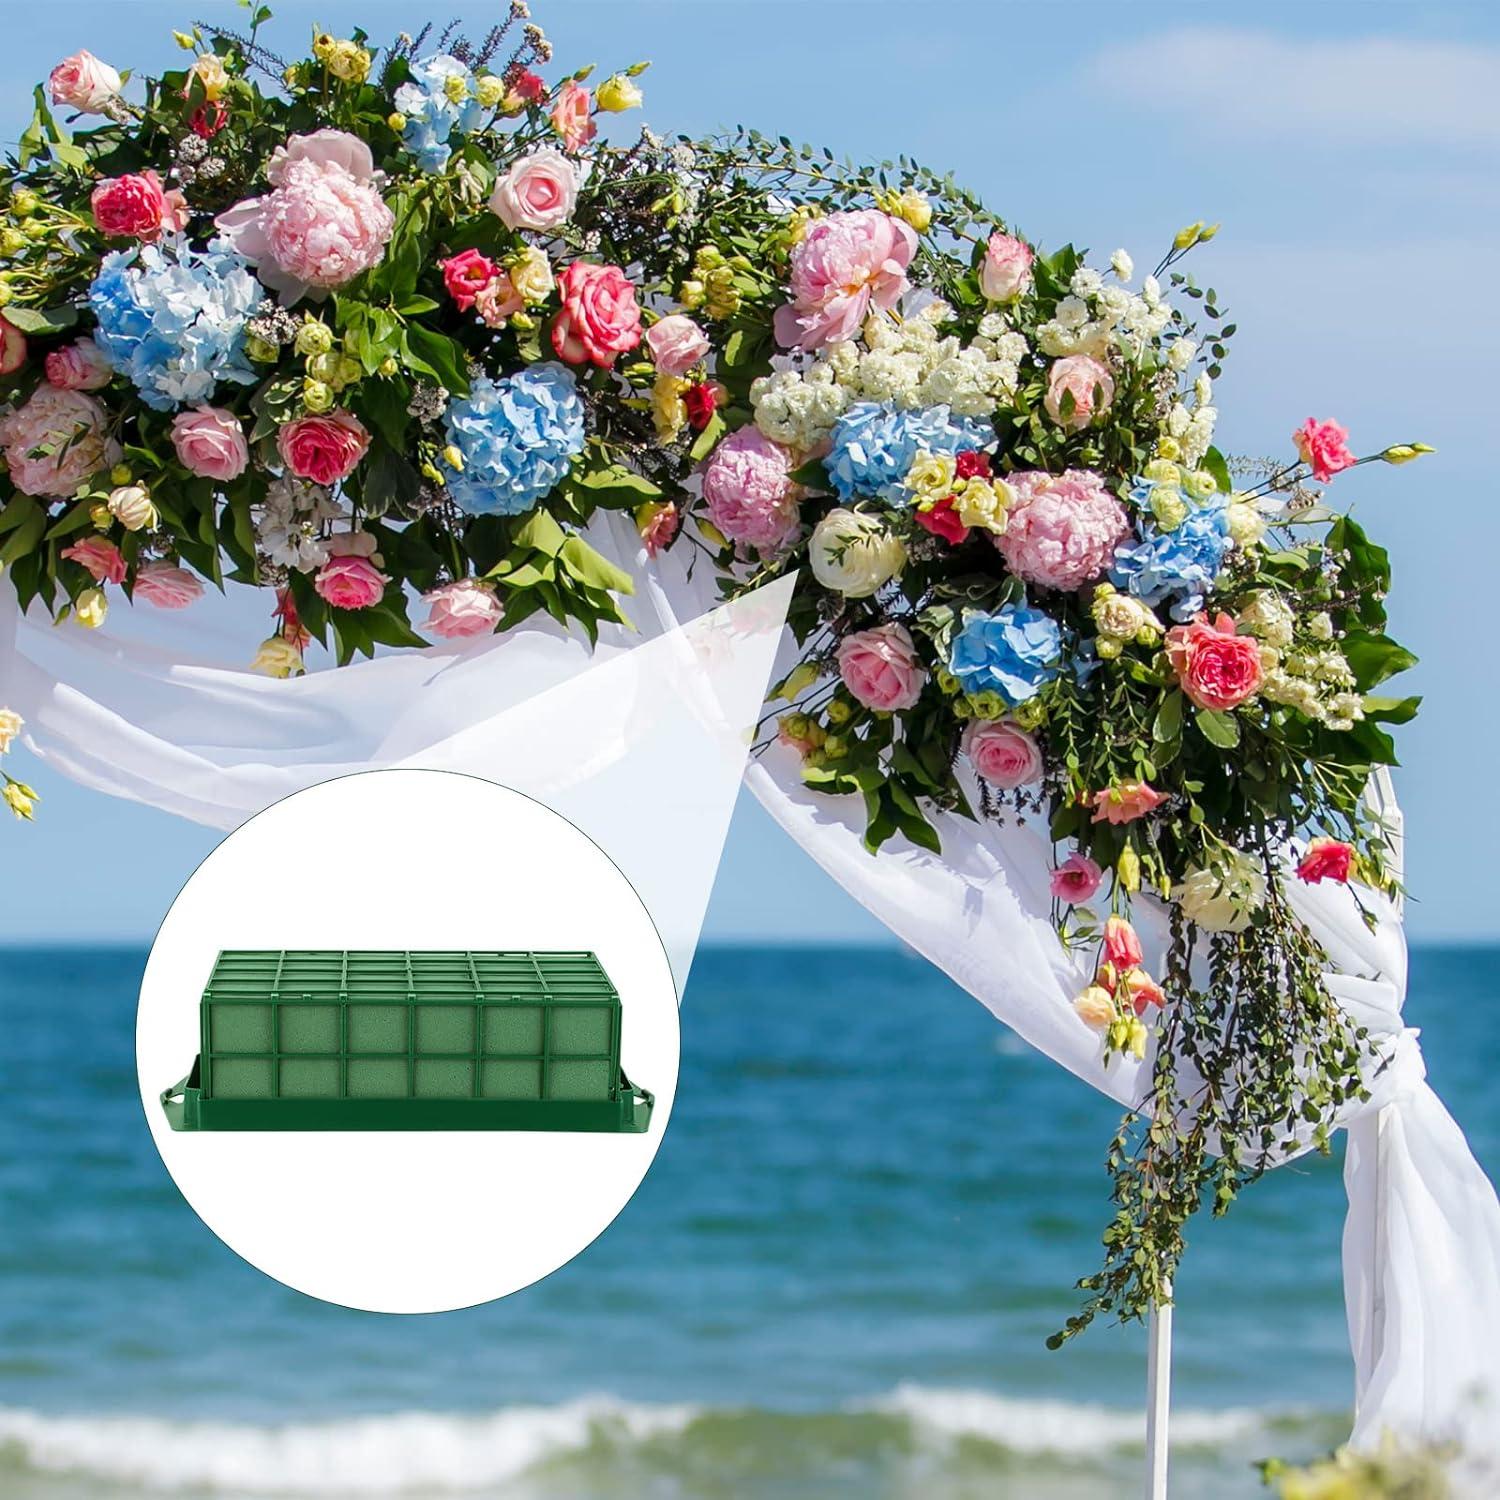 Hahood 2 Packs Floral Foam Cage Rectangle Flower Cage Holders with Floral  Foam Floral Arrangement Supplies for Fresh Flowers Home Weeding Decorations  11.8 x 4.3 x 3.1 Inches